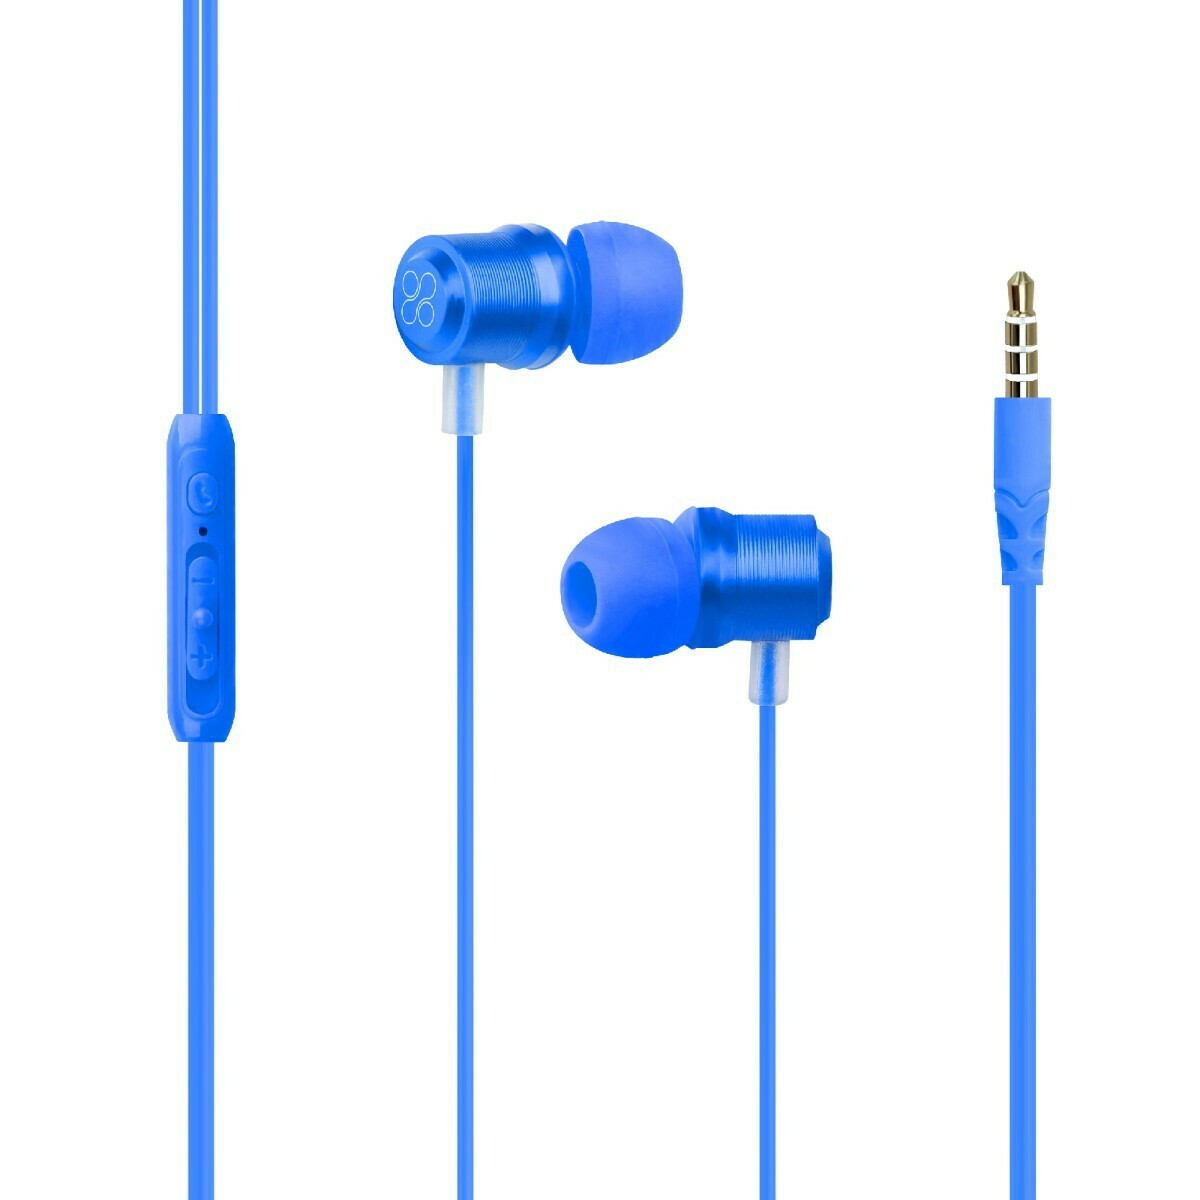 -Ear Stereo Earphones withPROMATE Travi Dynamic In In-Line Microphone ( blue )